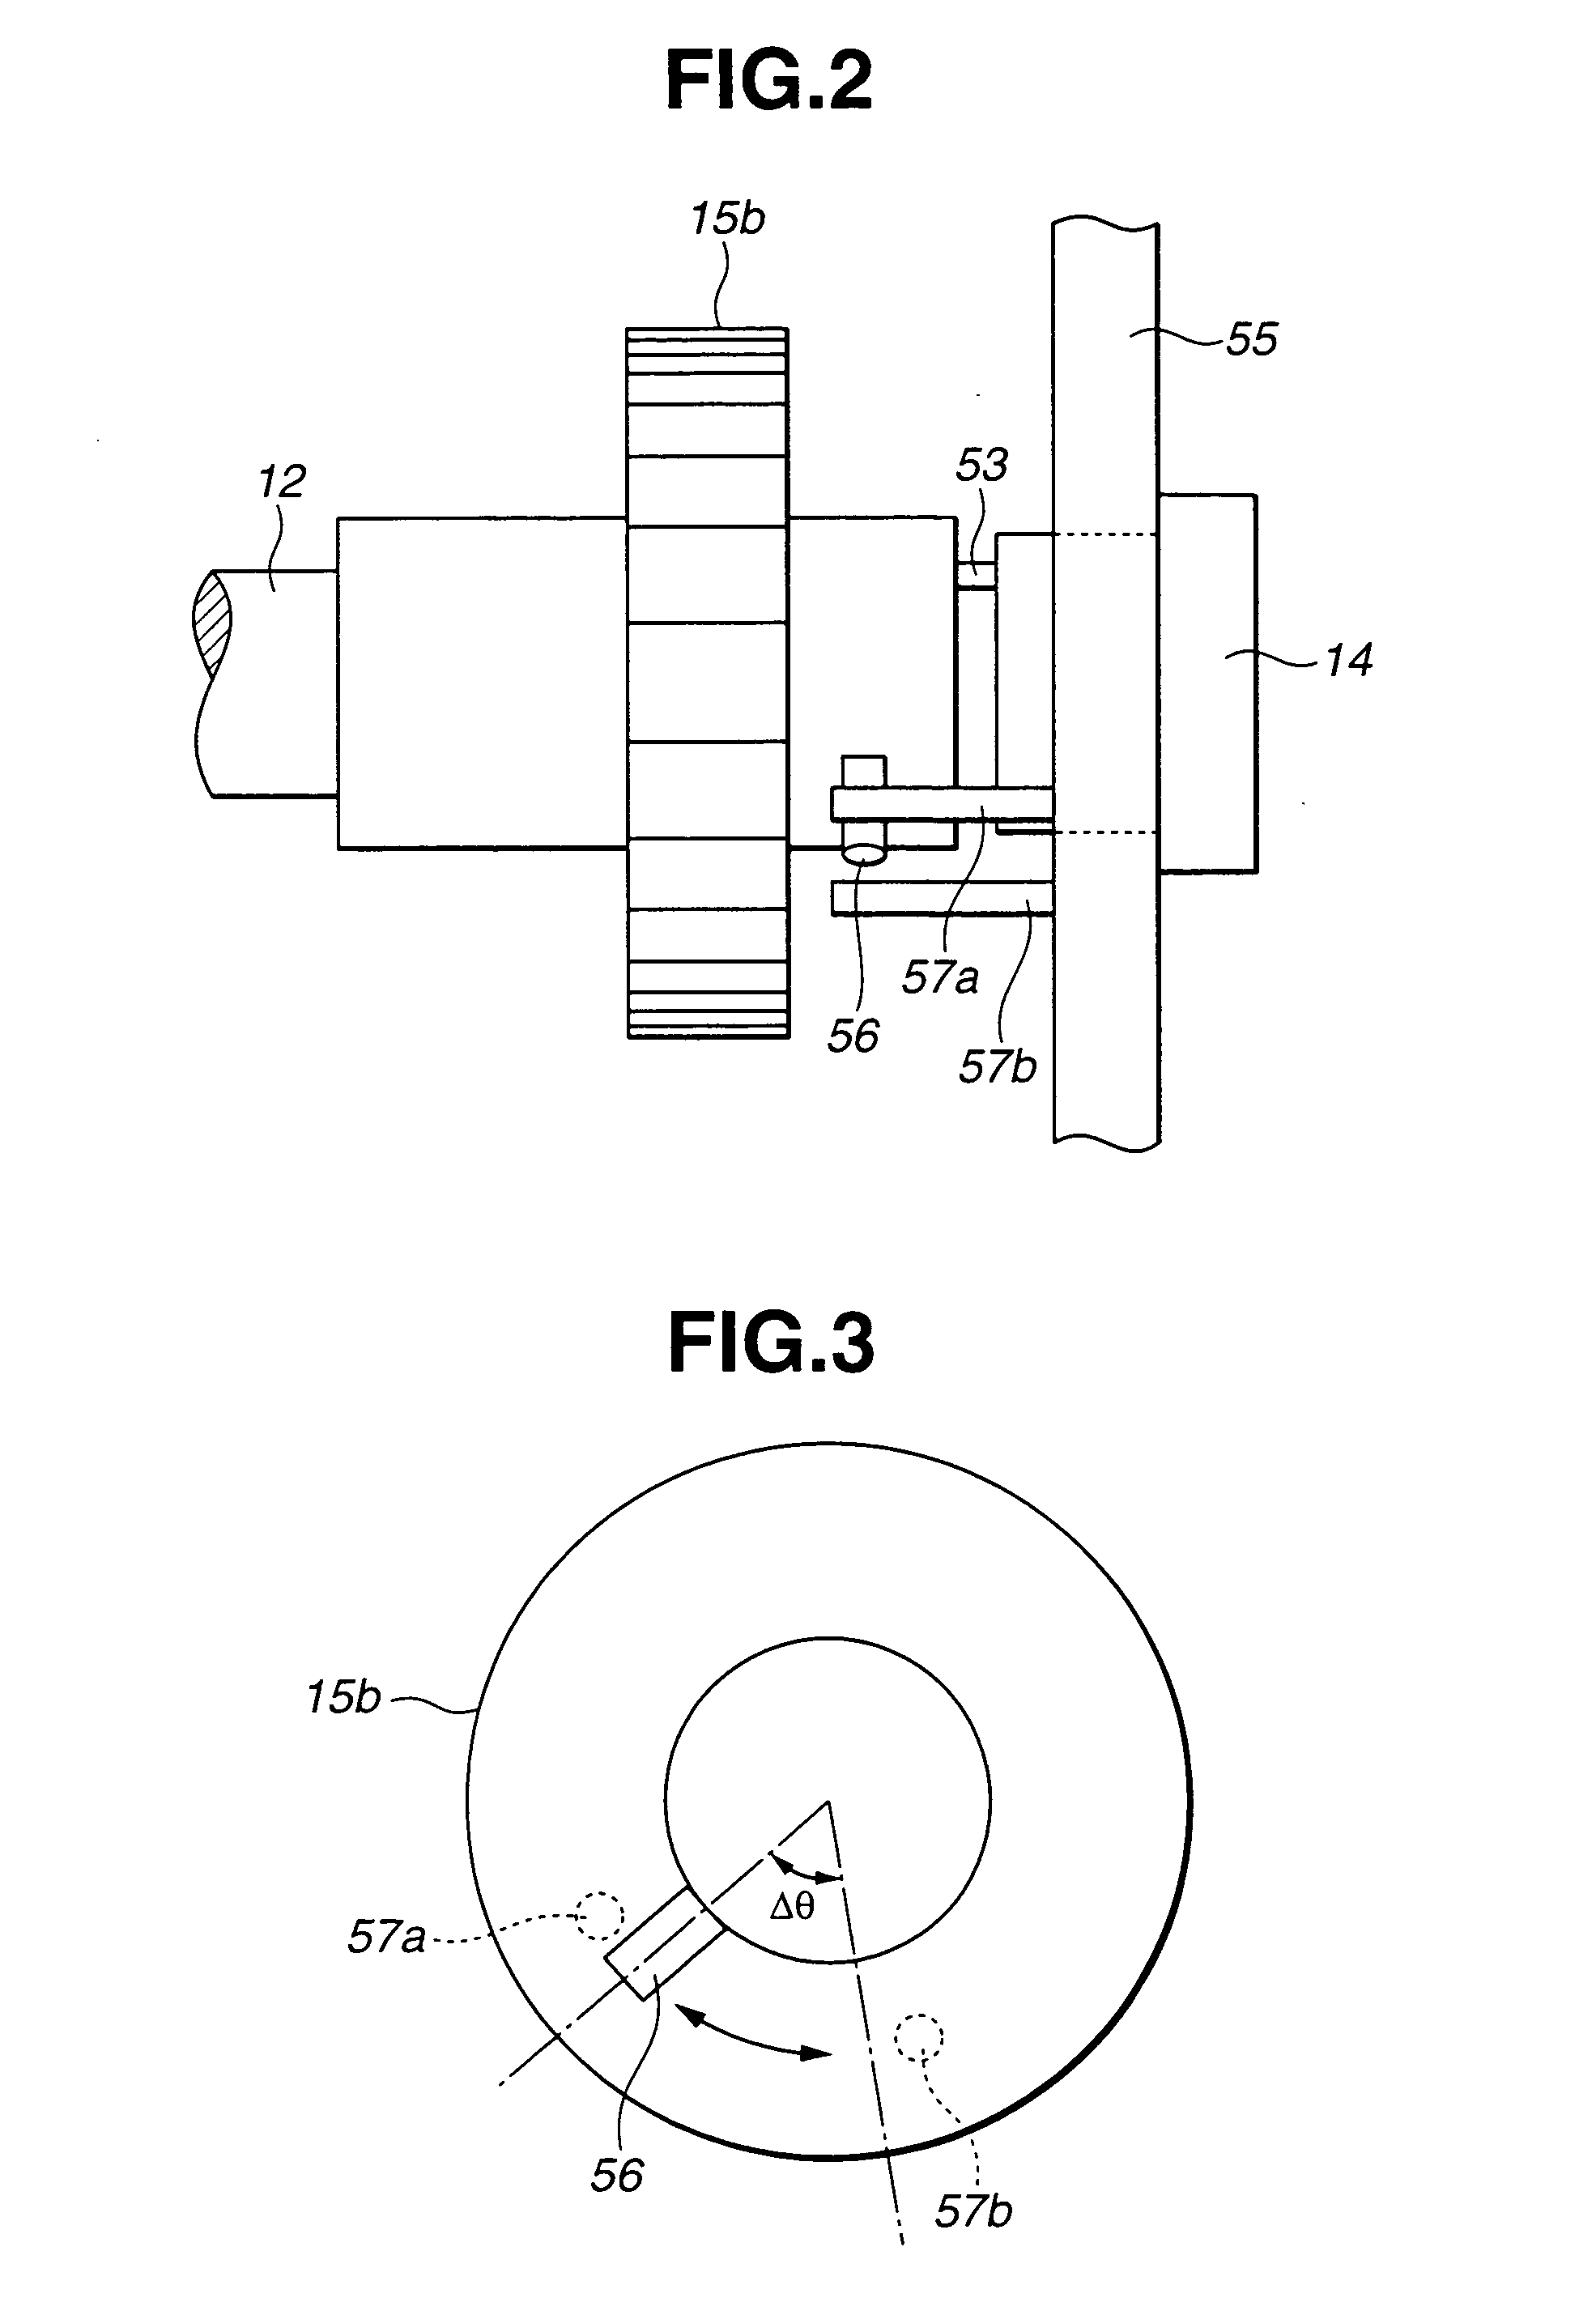 Learning apparatus and method for variable valve control of internal combustion engine